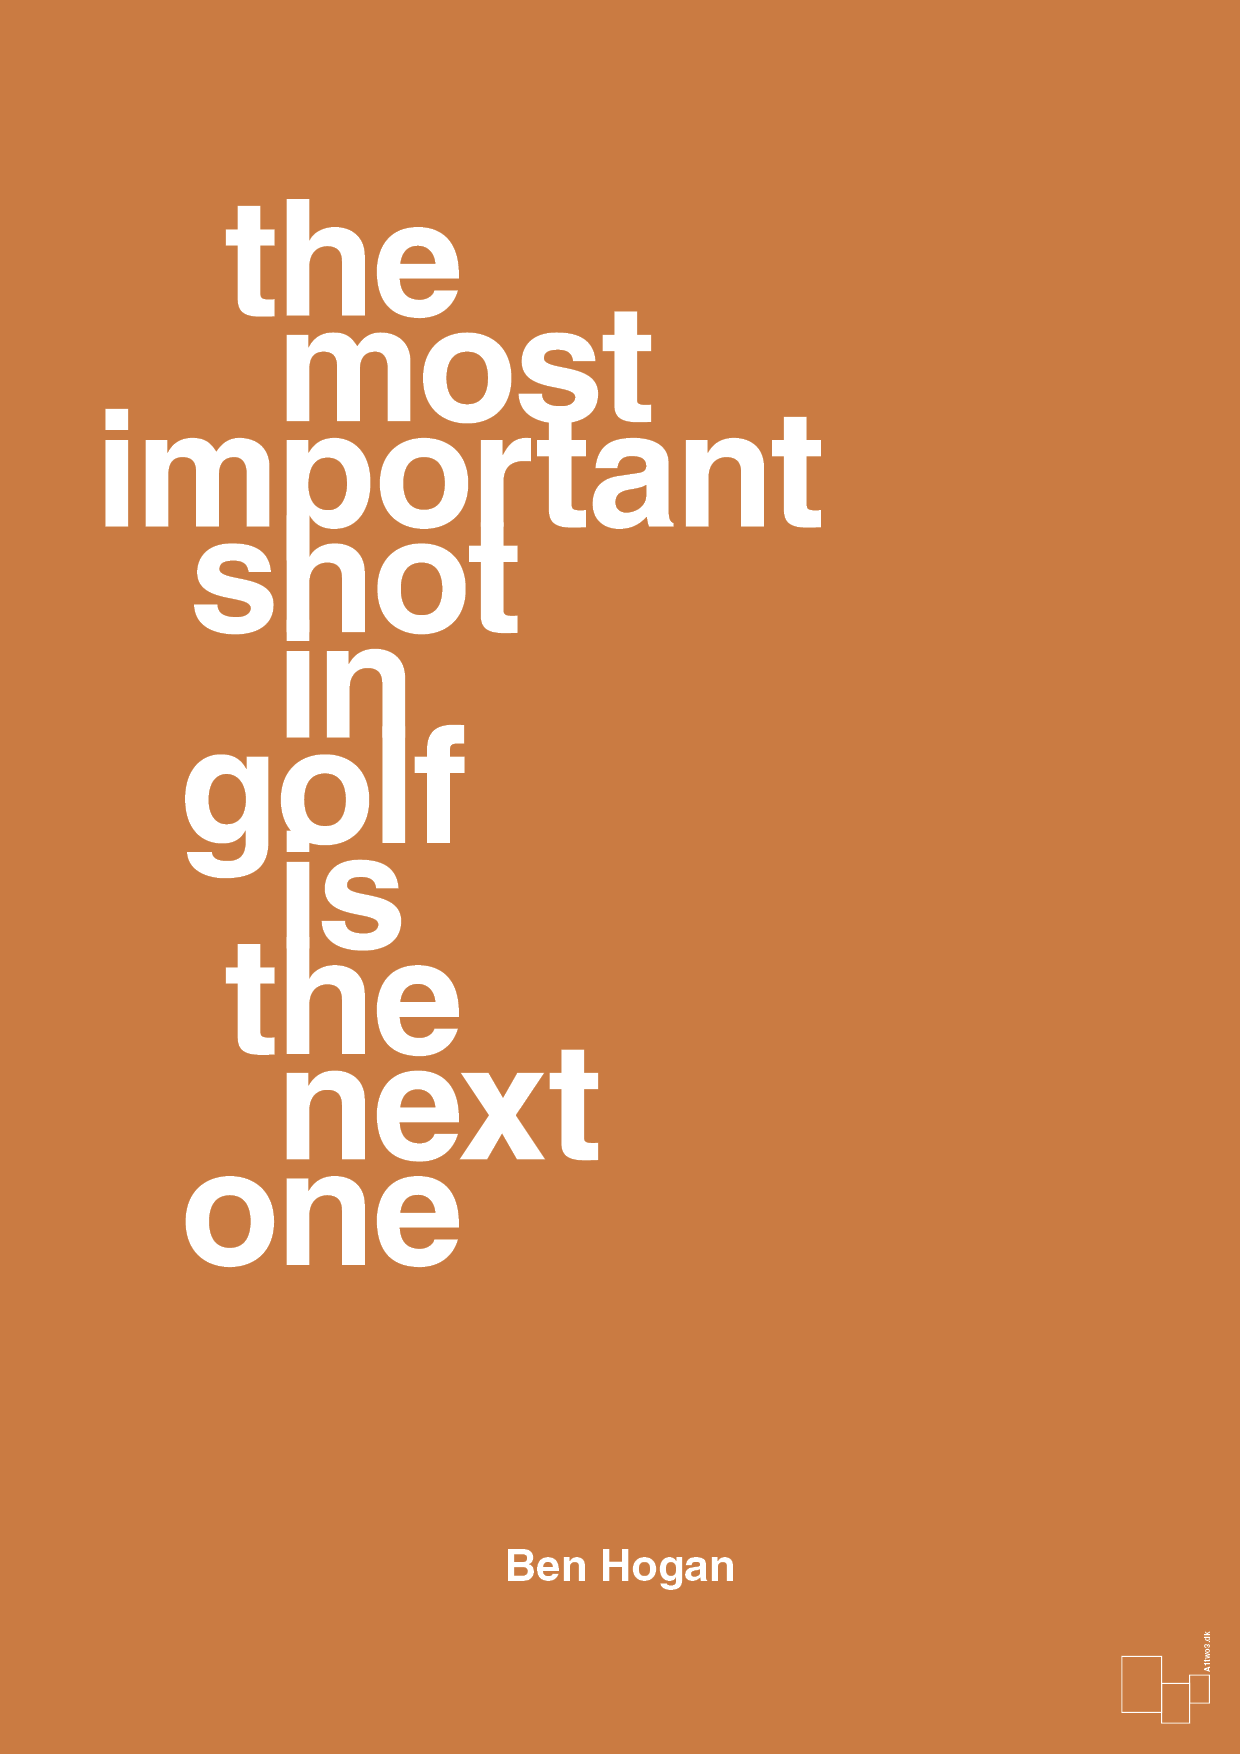 the most important shot in golf is the next one - Plakat med Citater i Rumba Orange